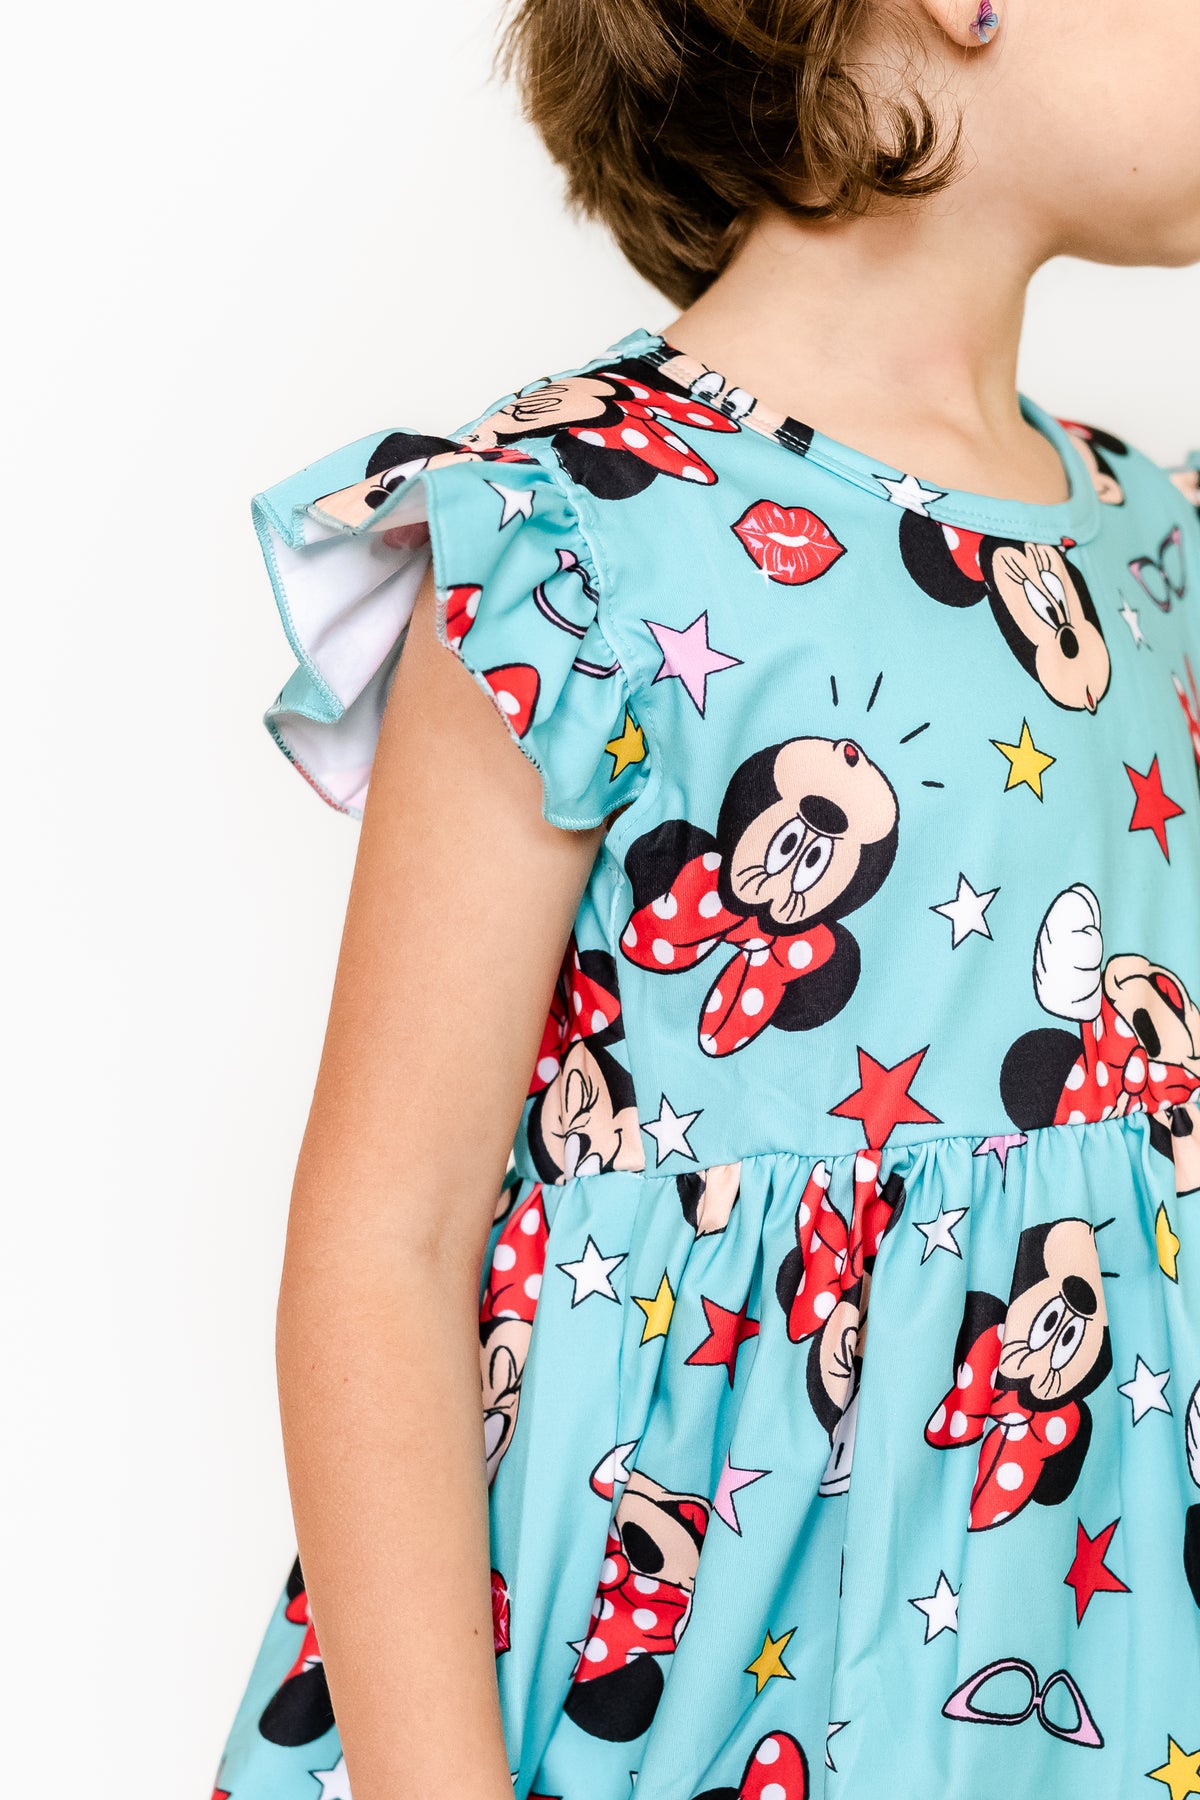 The Silly Girl Dress | Girls | Happiest Place Collection